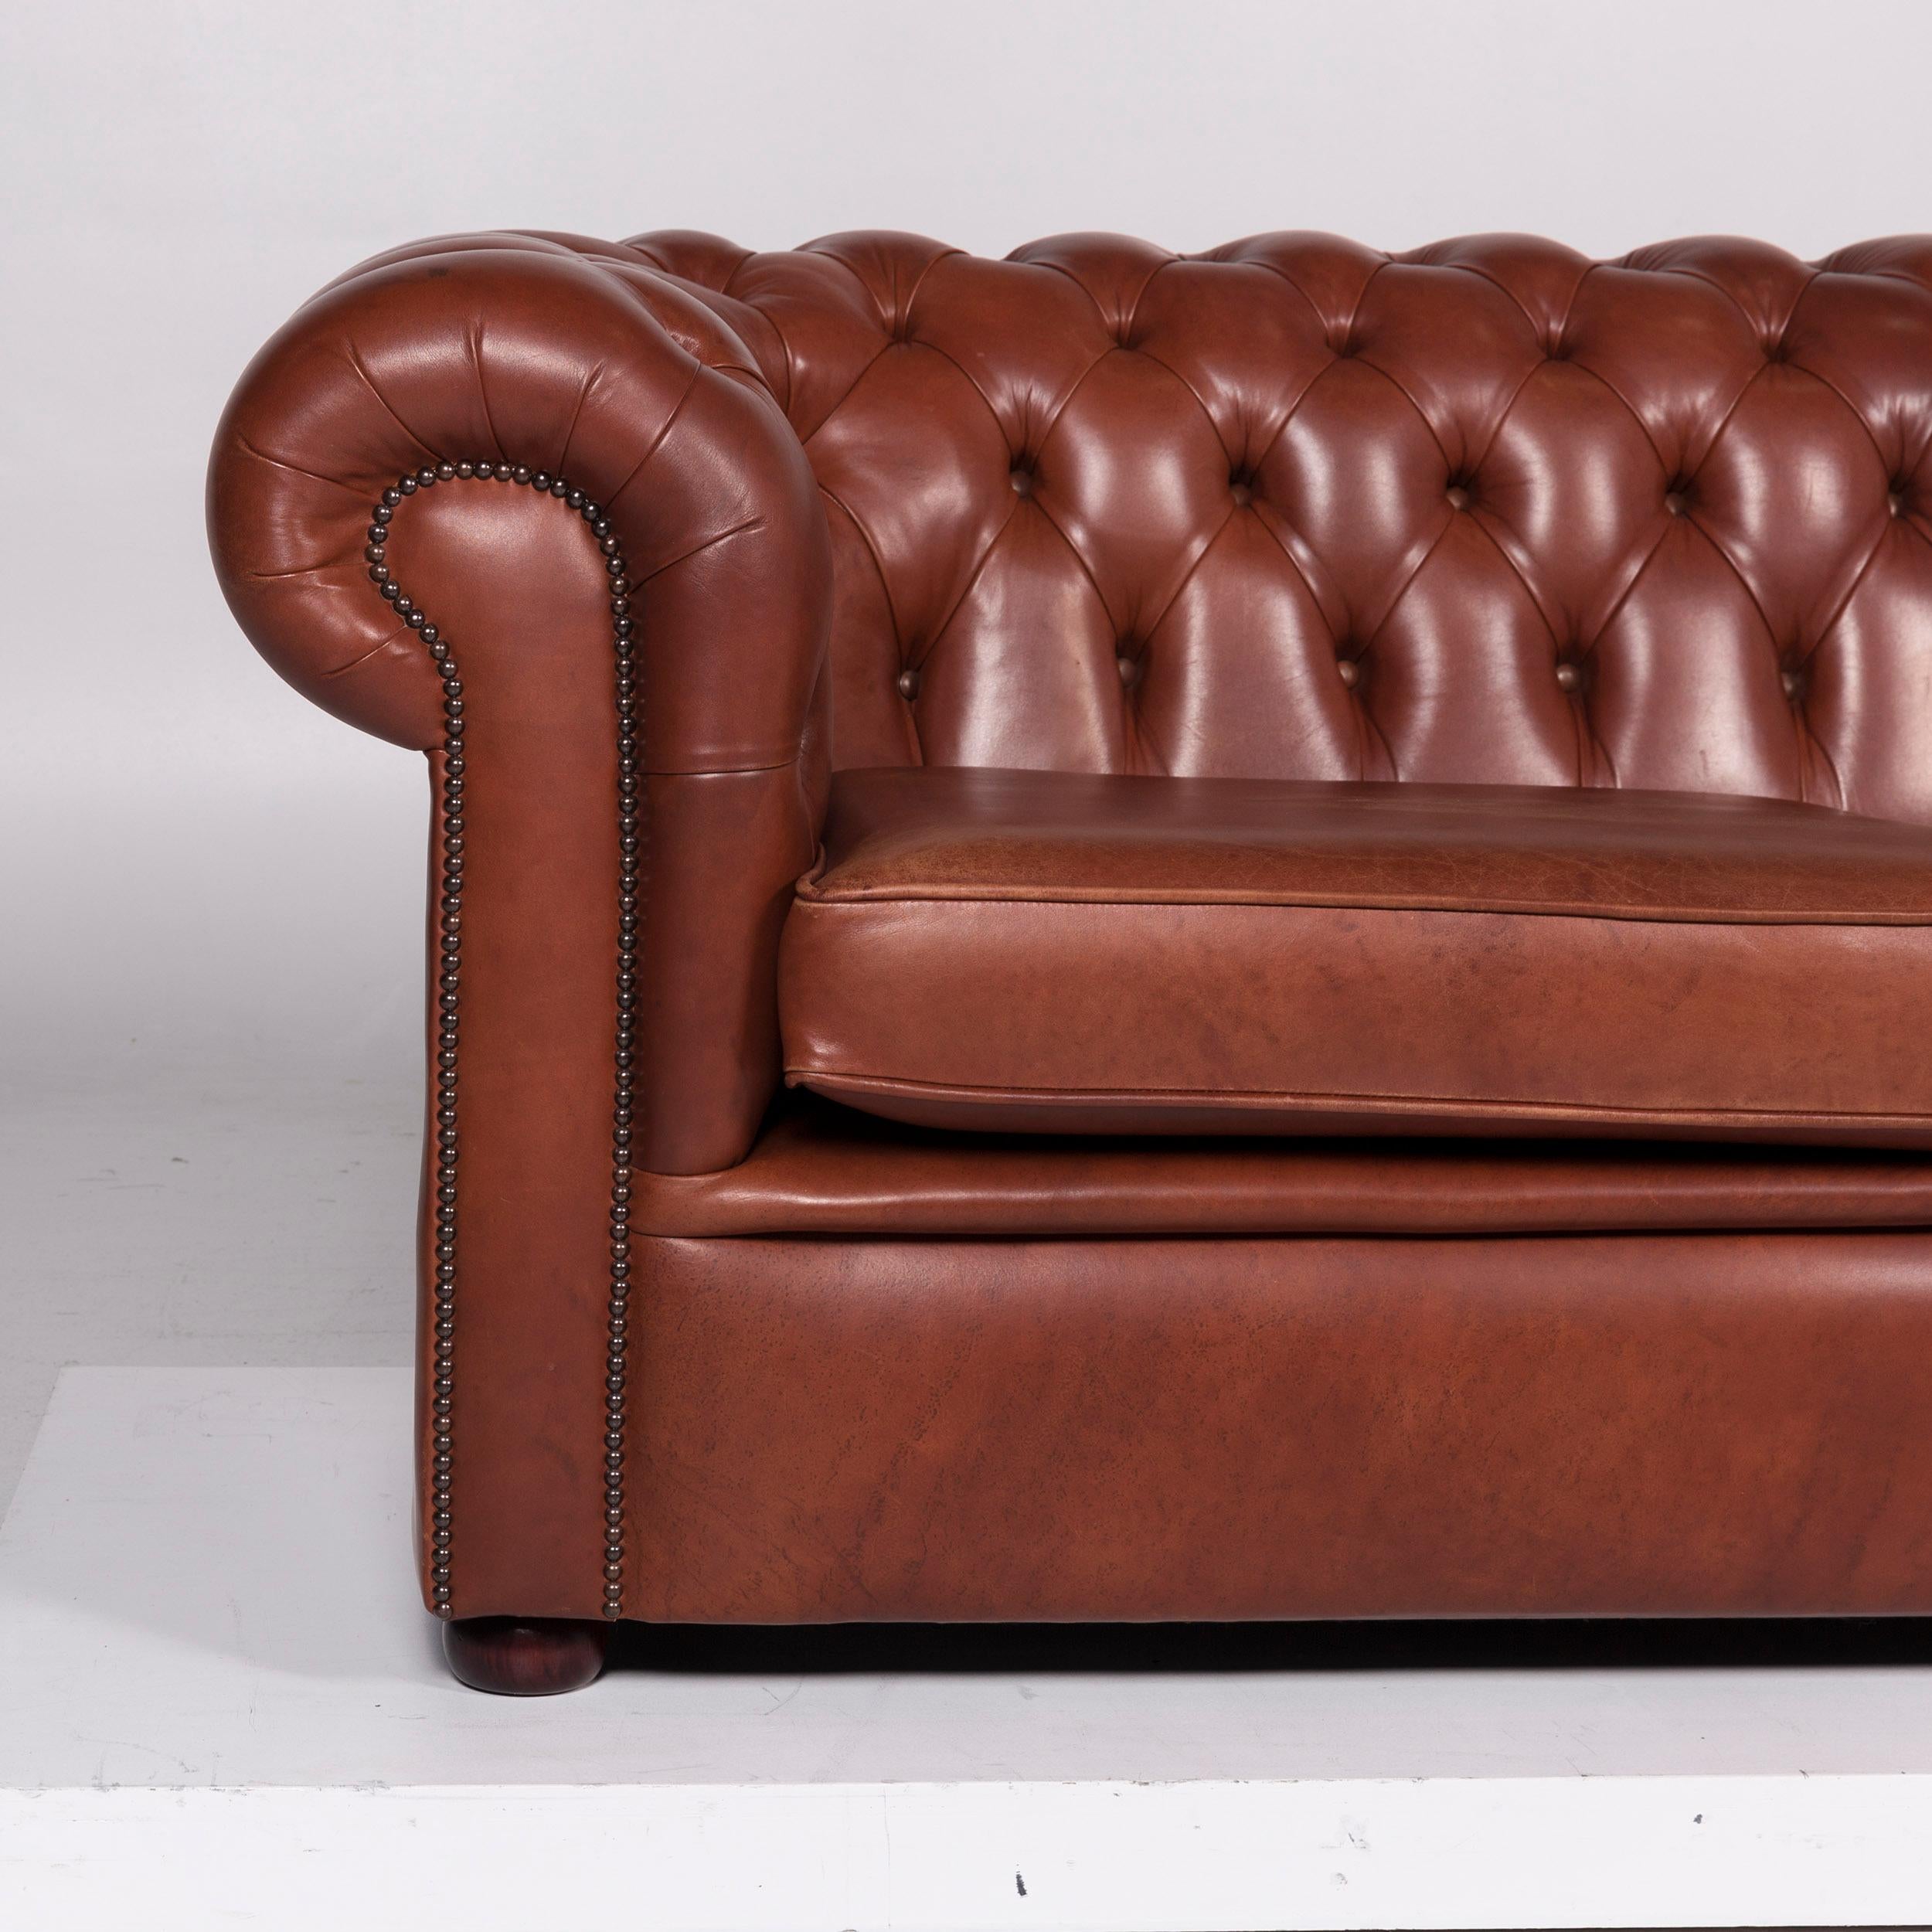 Contemporary Chesterfield Leather Sofa Set Red Brown 1 Three-Seat 1 Two-Seat For Sale